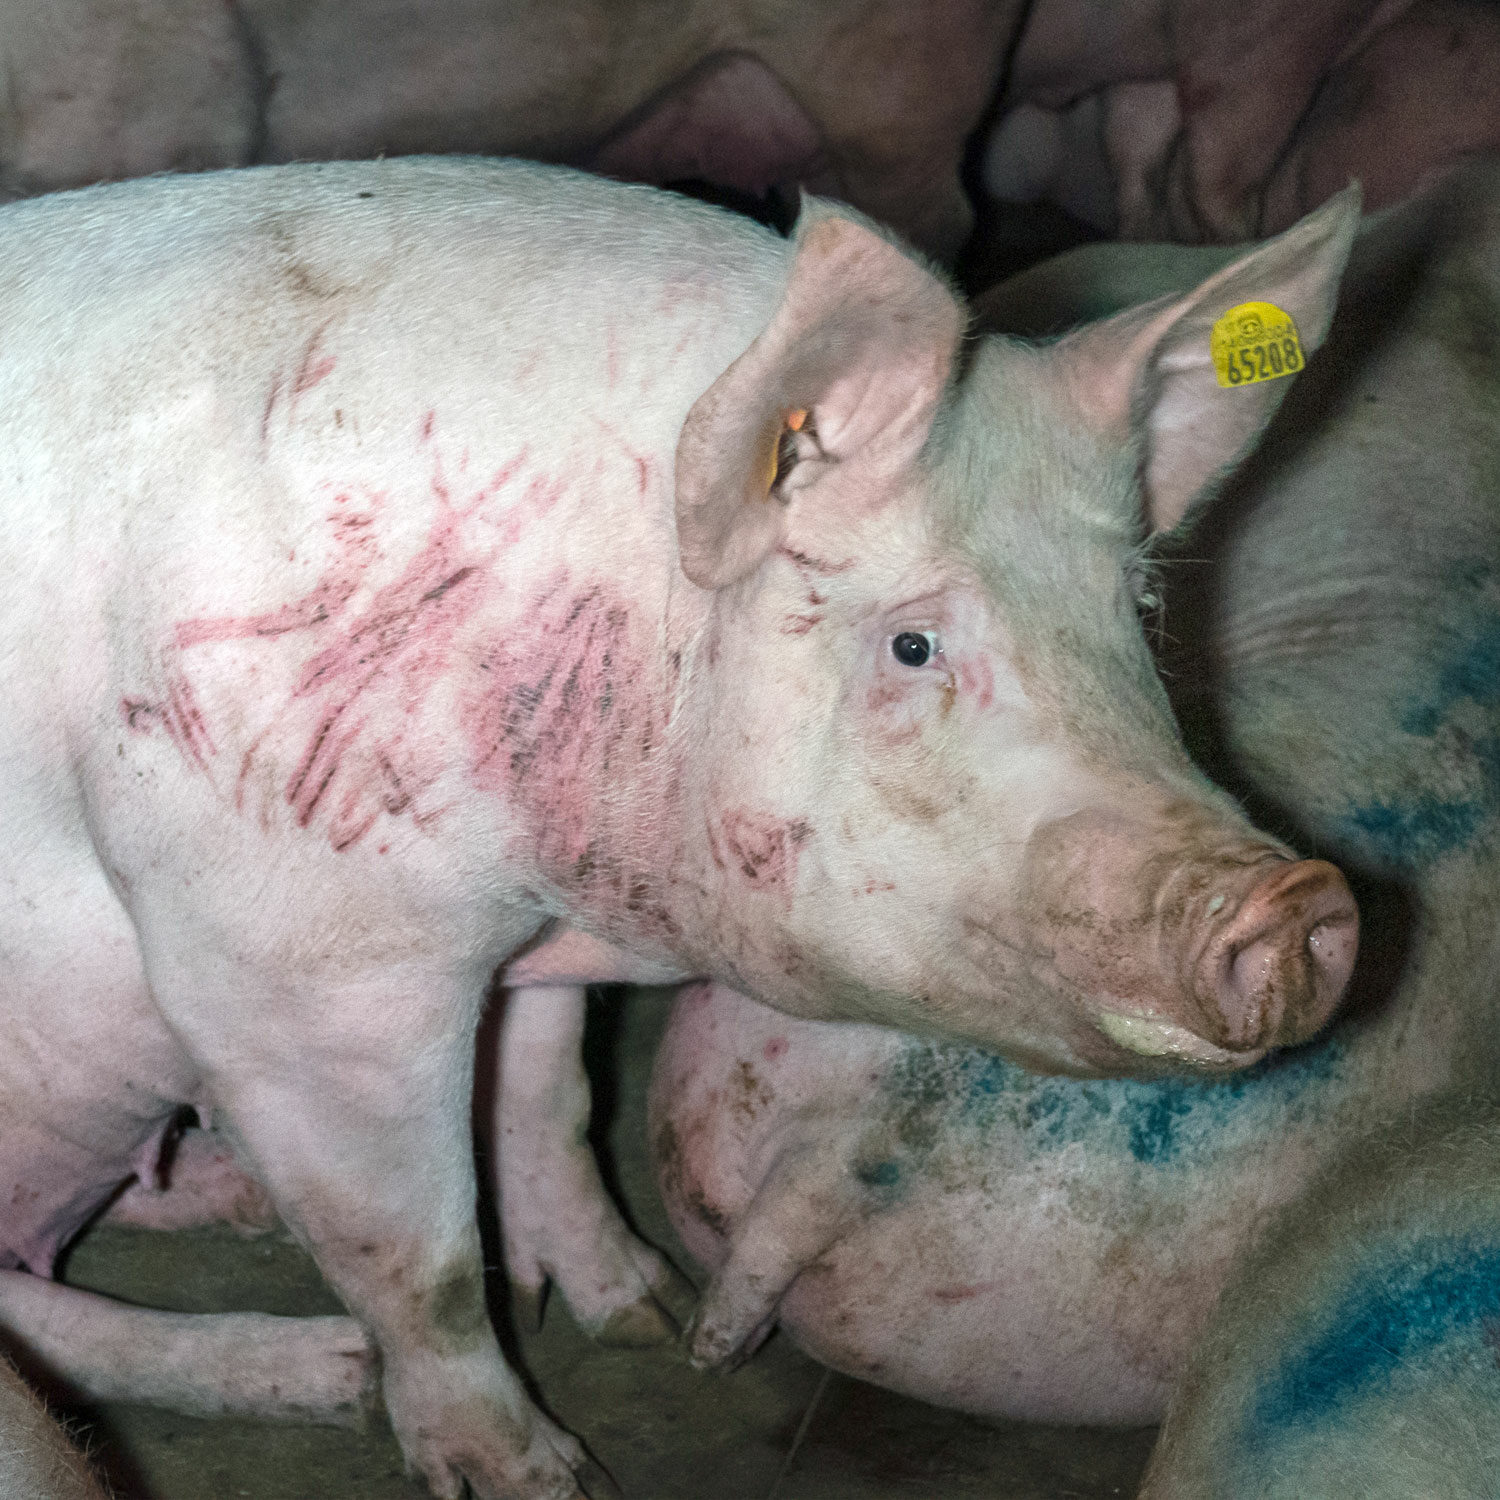 Scared pig on factory farm